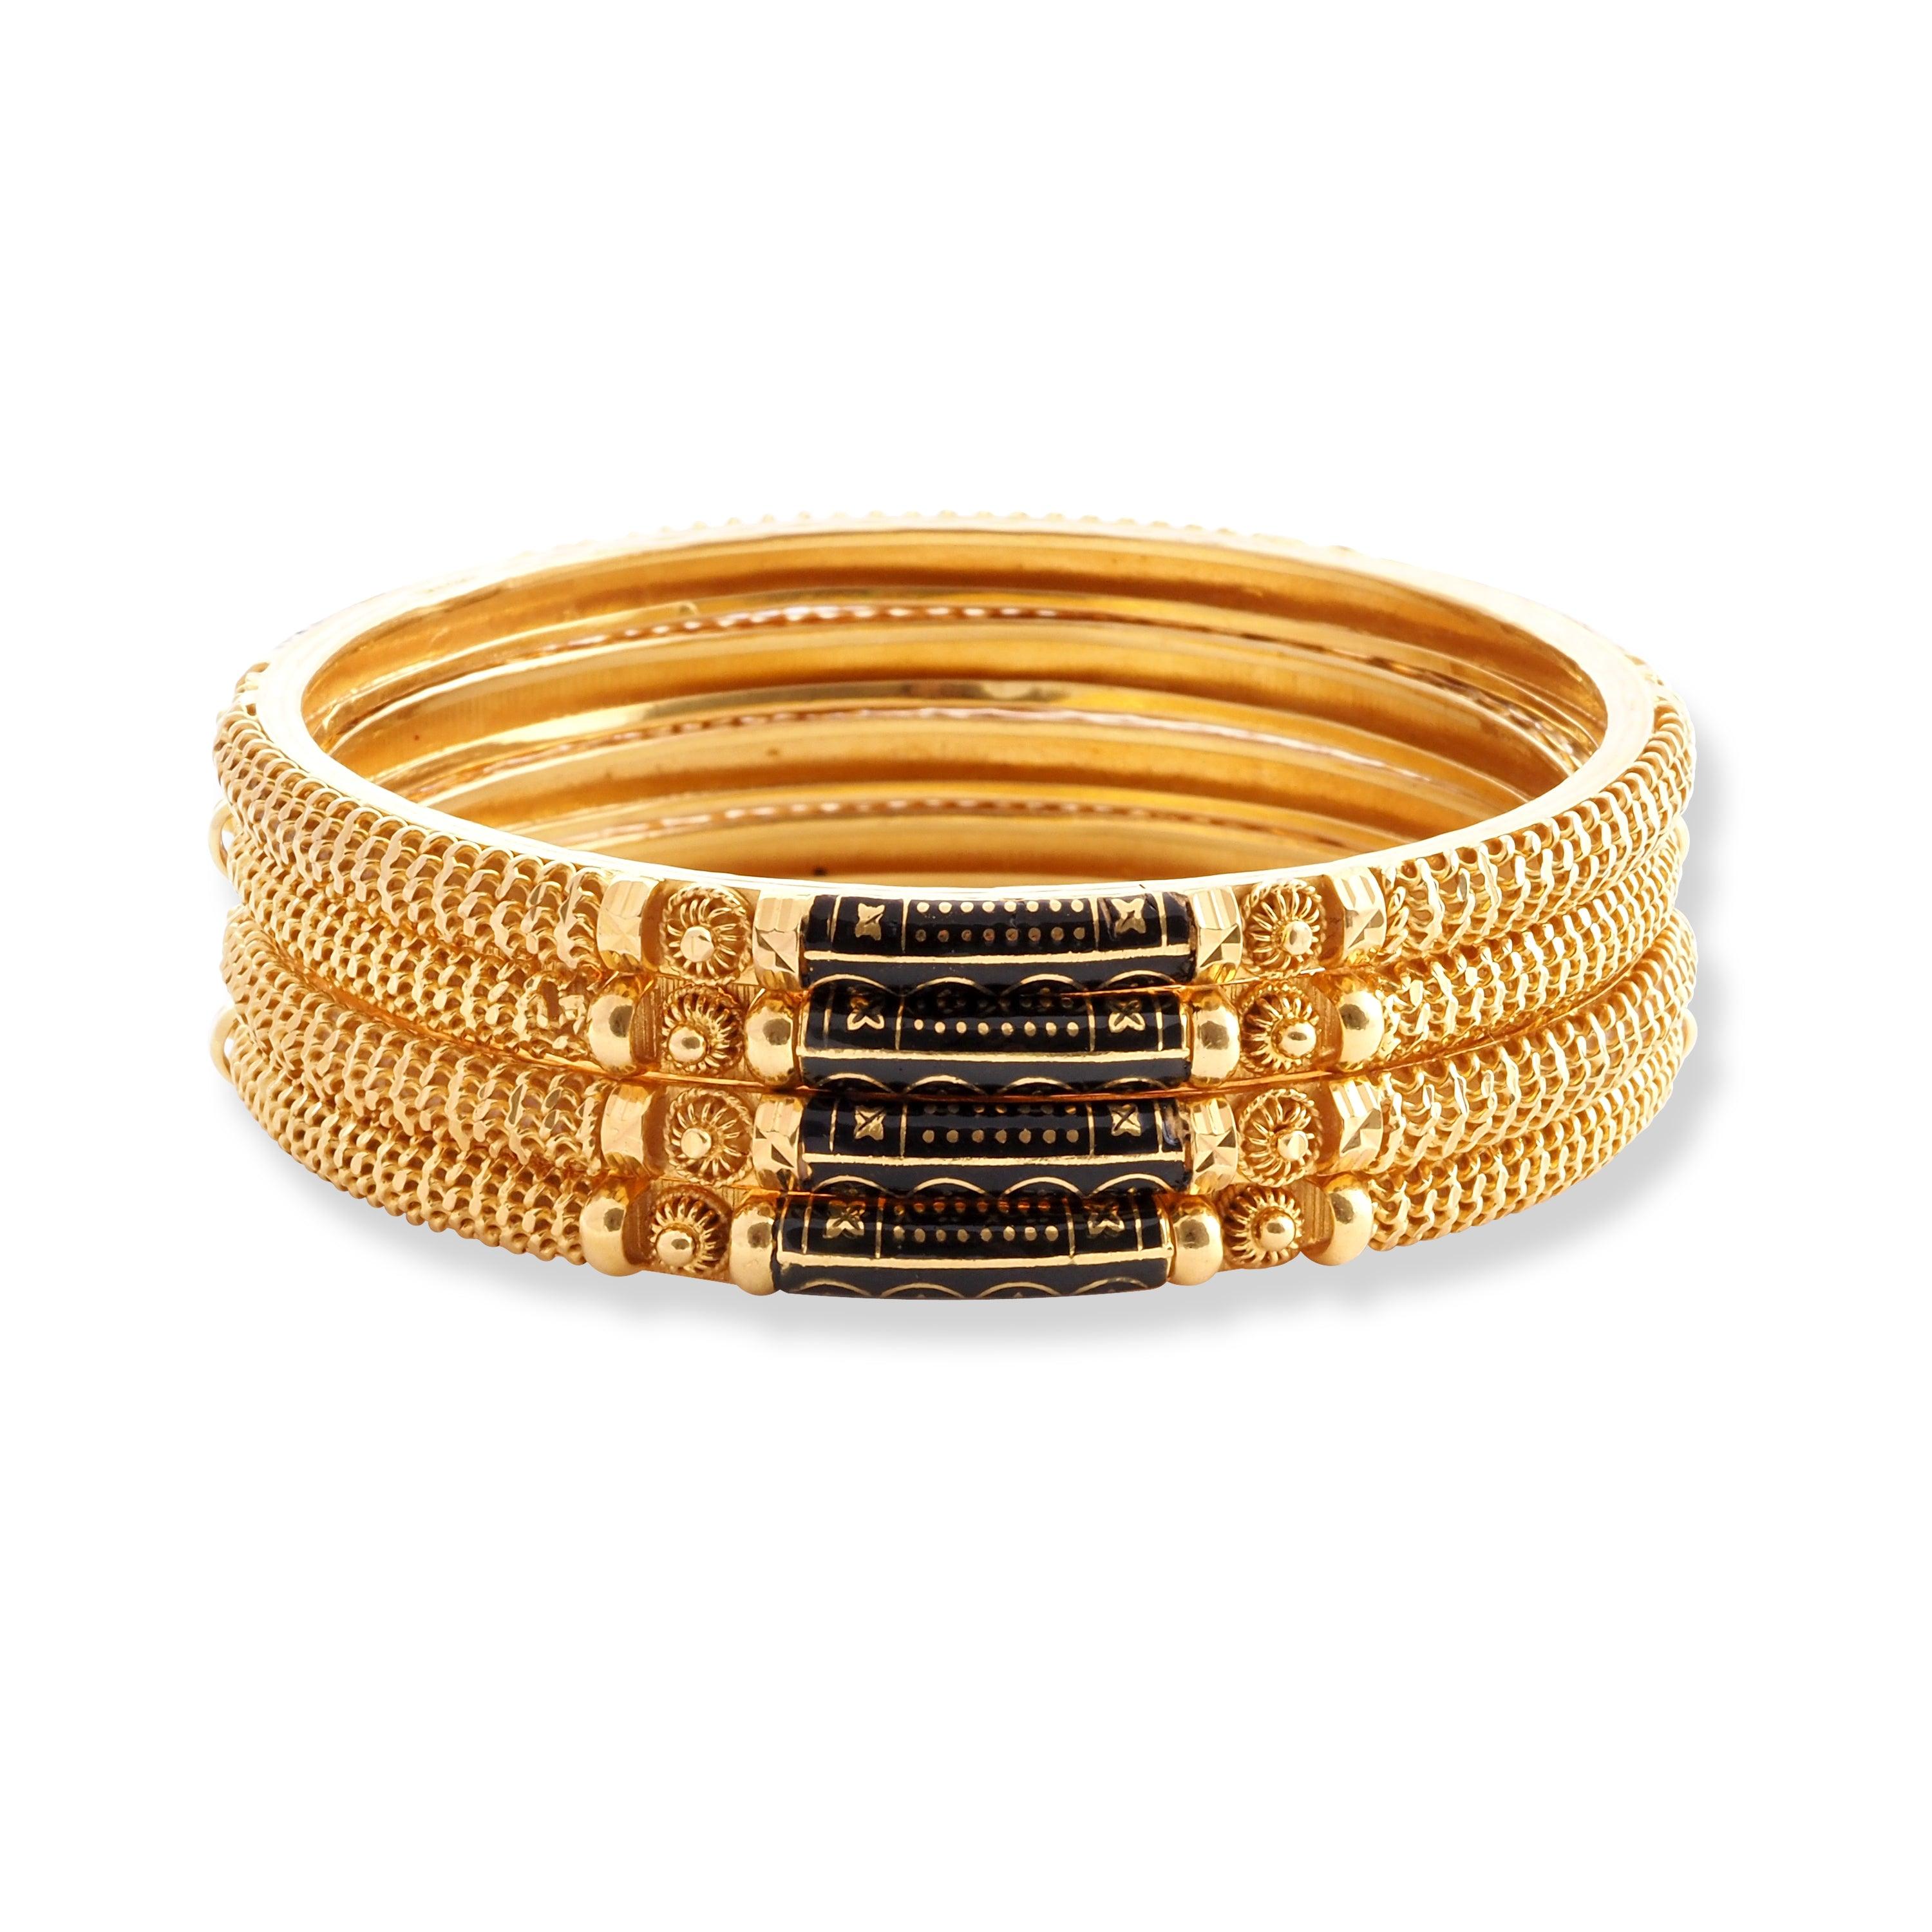 Set of Four 22ct Gold Bangles with Black Rhodium Plating B-8579 - Minar Jewellers